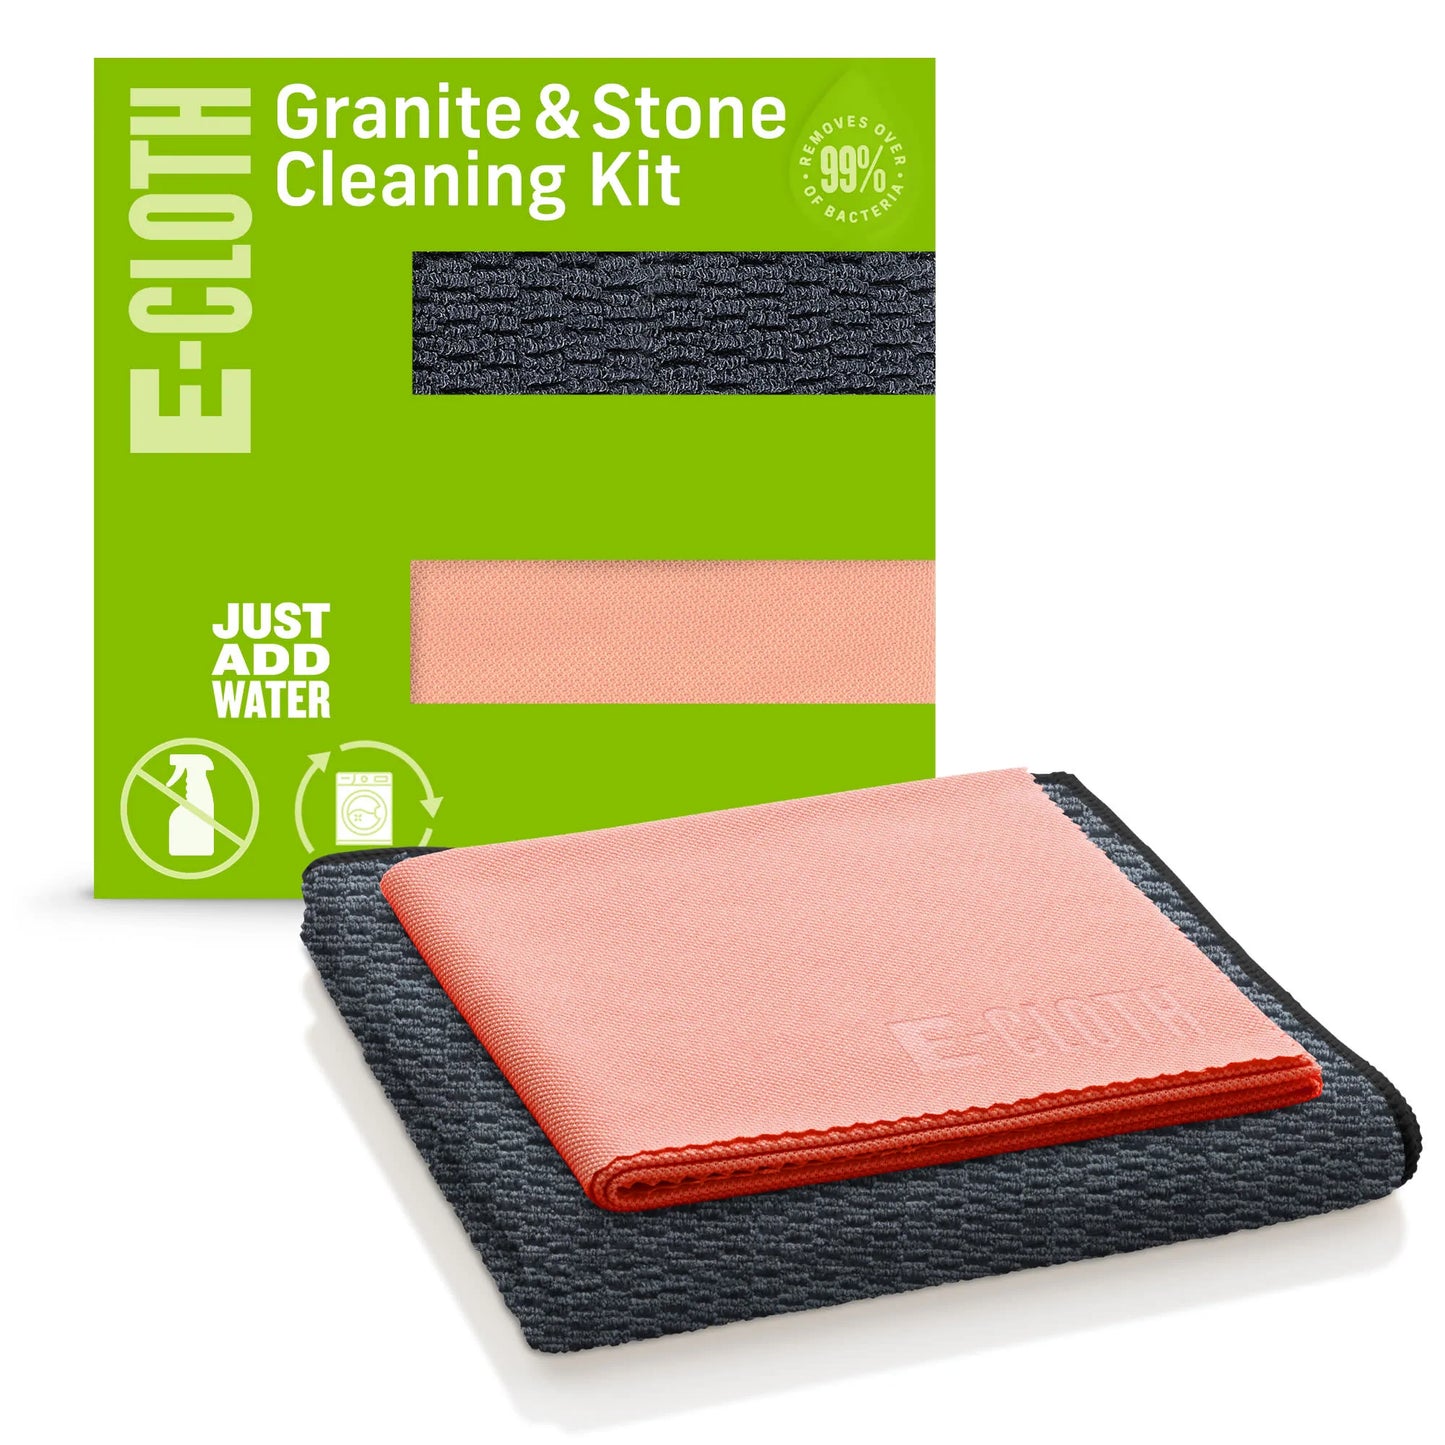 Granite & Stone Cleaning Kit- 2 Cloths